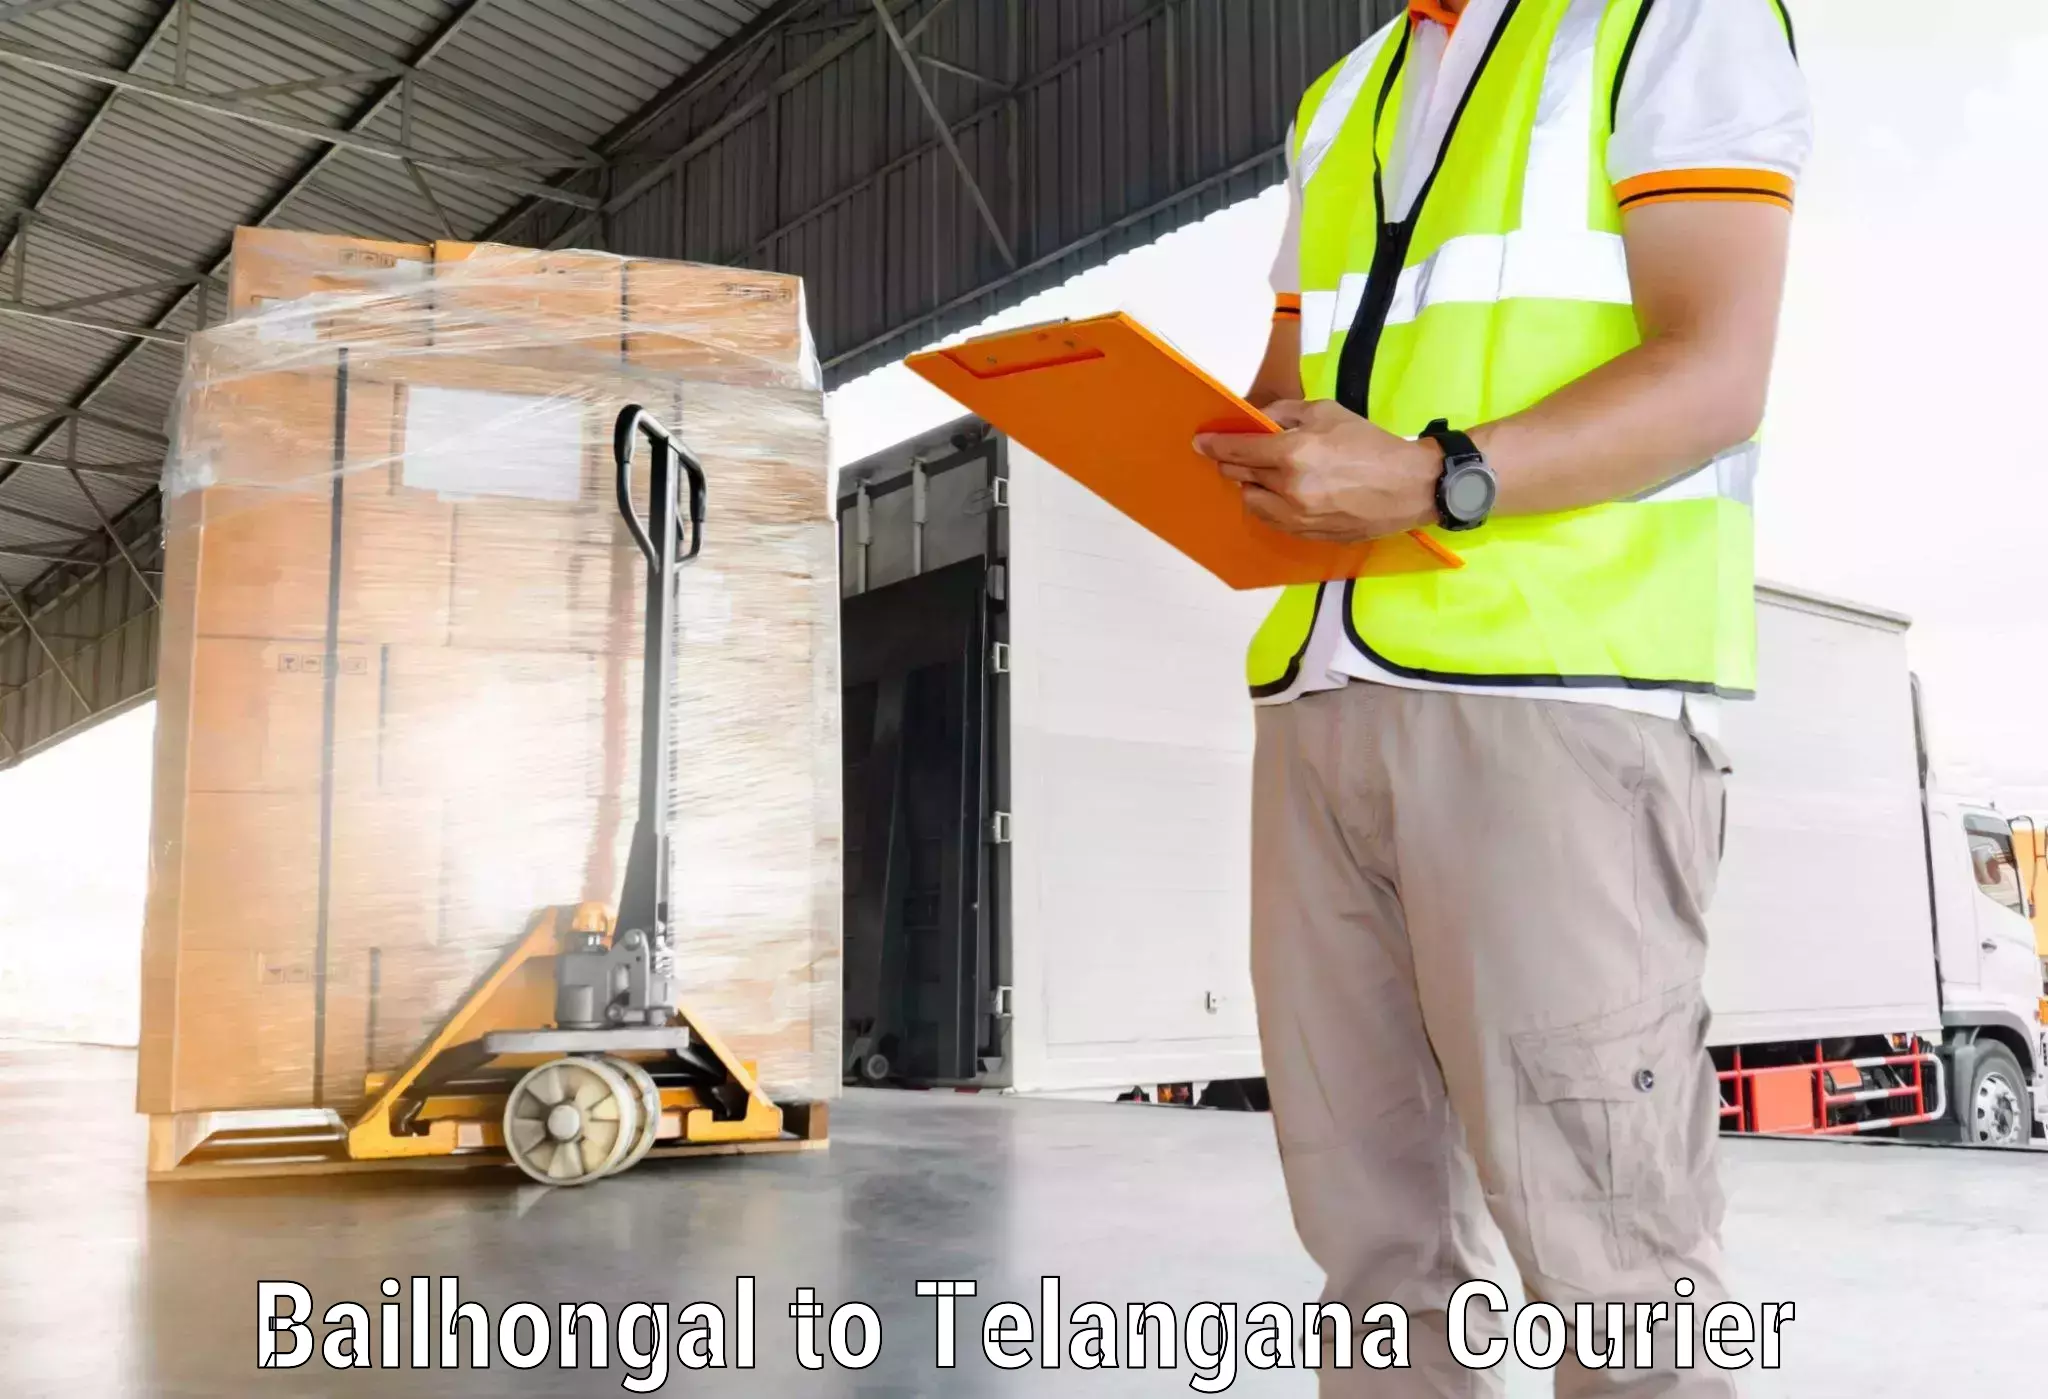 Global courier networks Bailhongal to Ramagundam